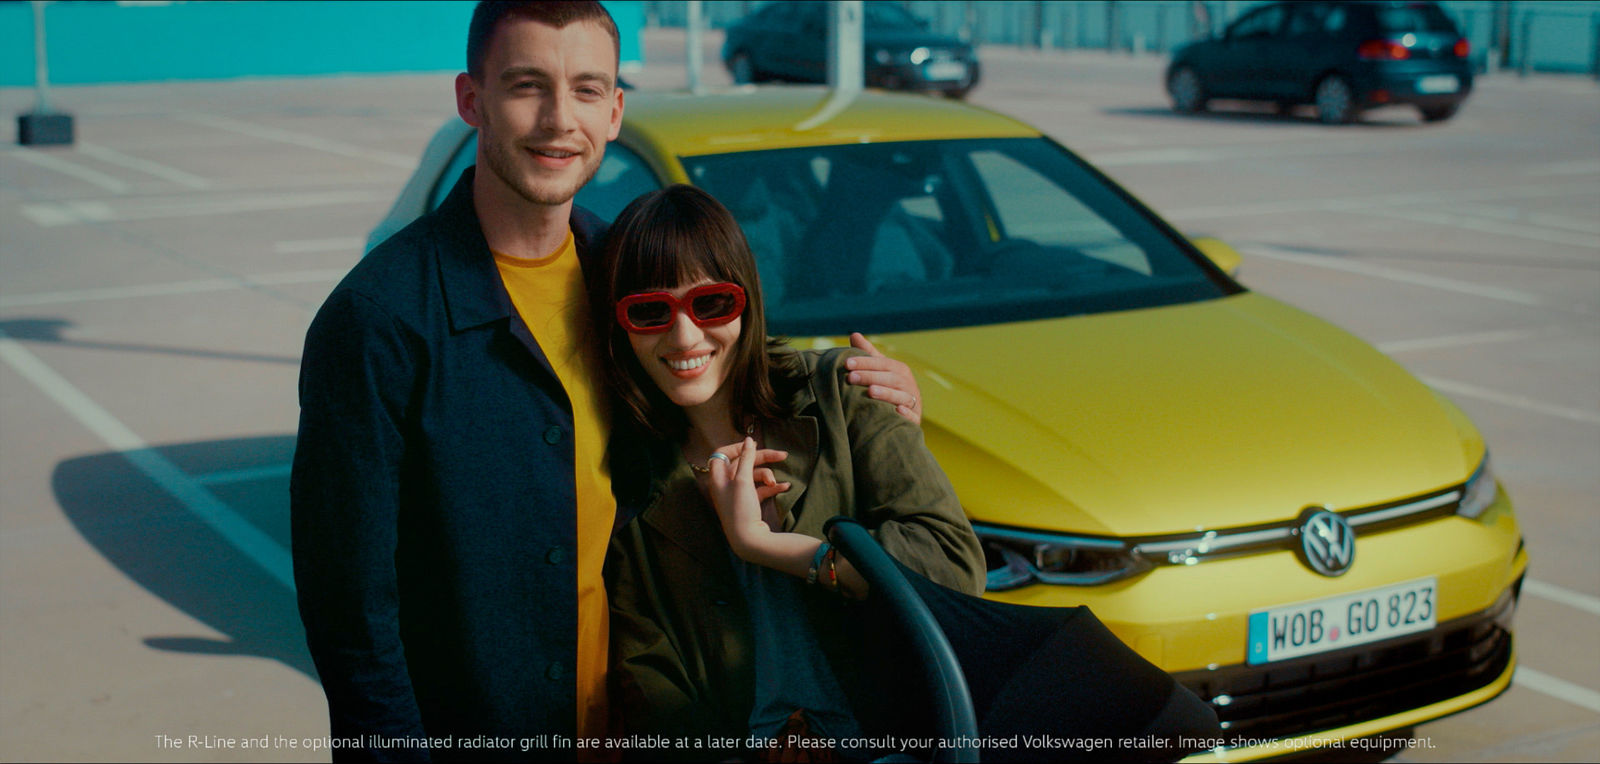 ʺLife happens with a Golfʺ: New Volkswagen marketing campaign starts on 6 December